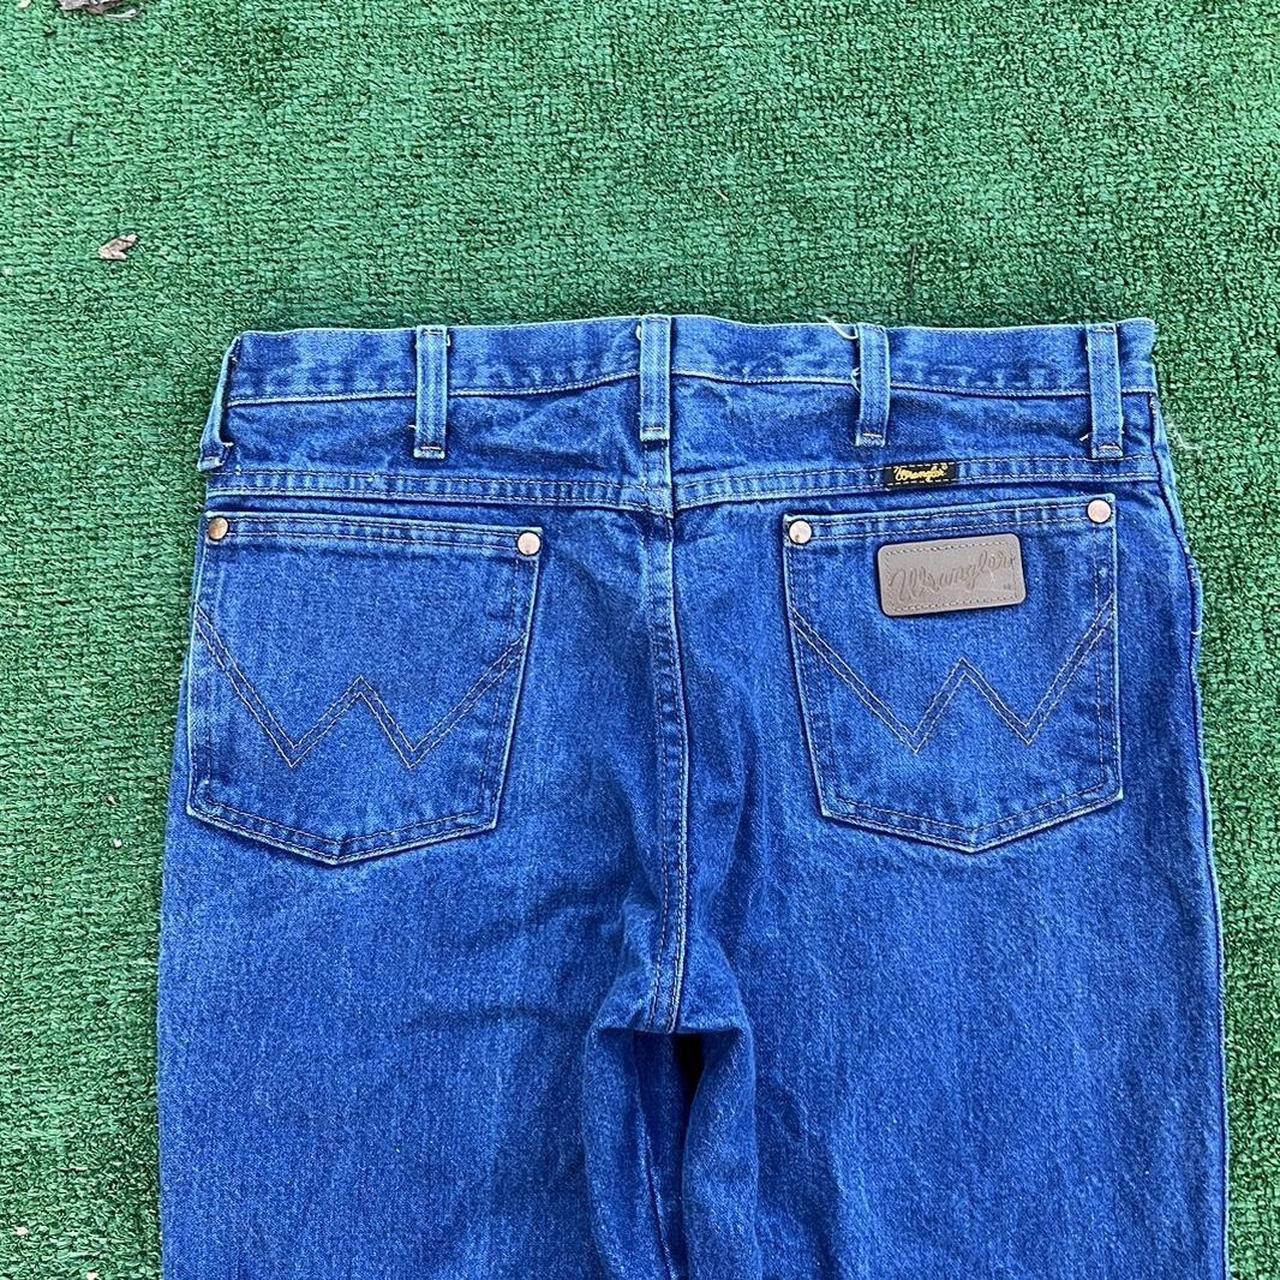 Baggy Very Clean Coloring Wrangler Blue Jeans With... - Depop